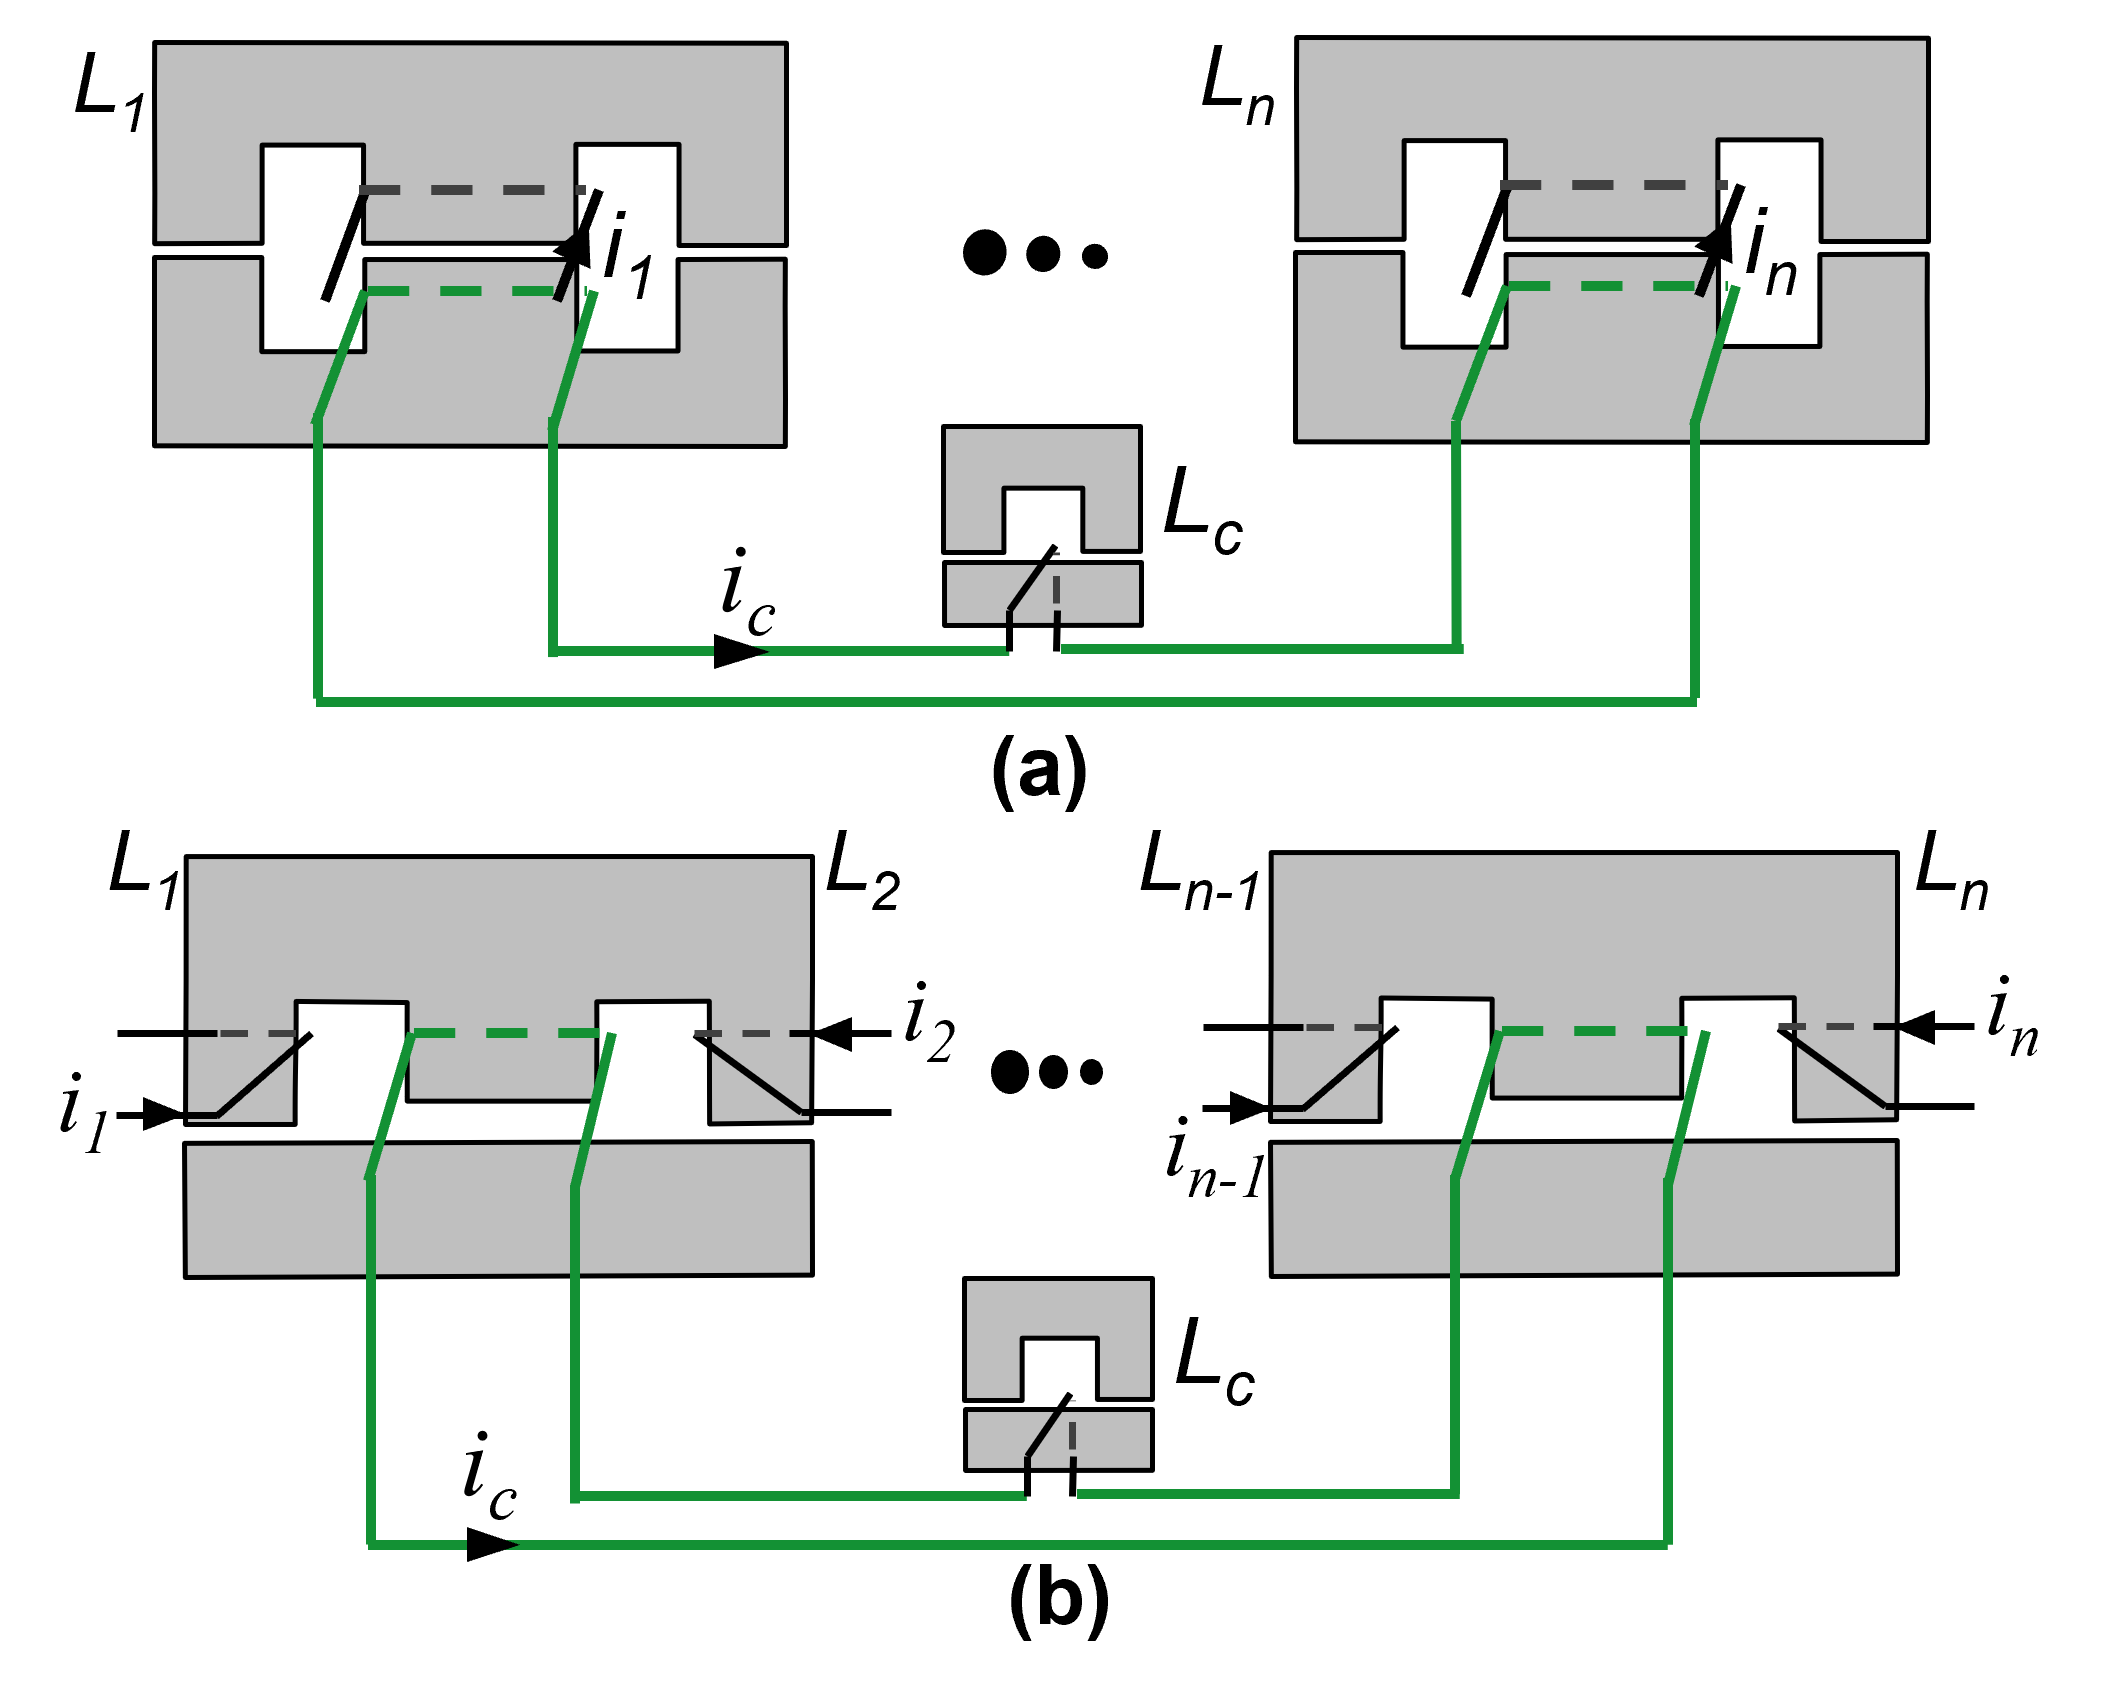 Coupled inductor structures